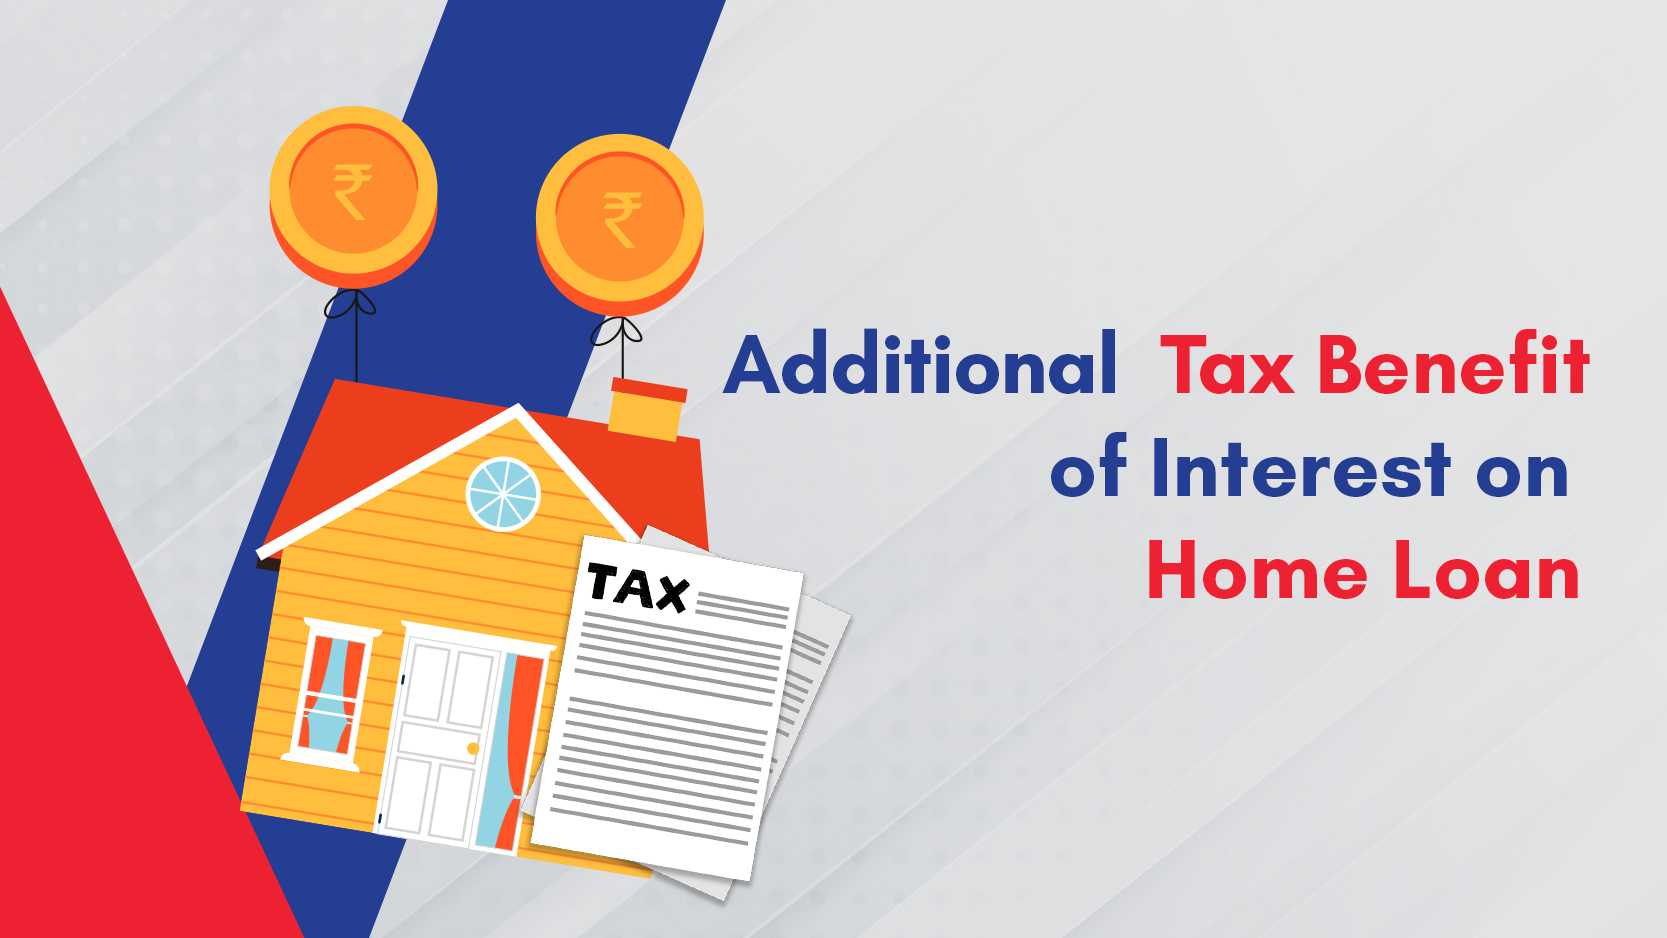 Additional Tax Benefit of Interest on Home Loan